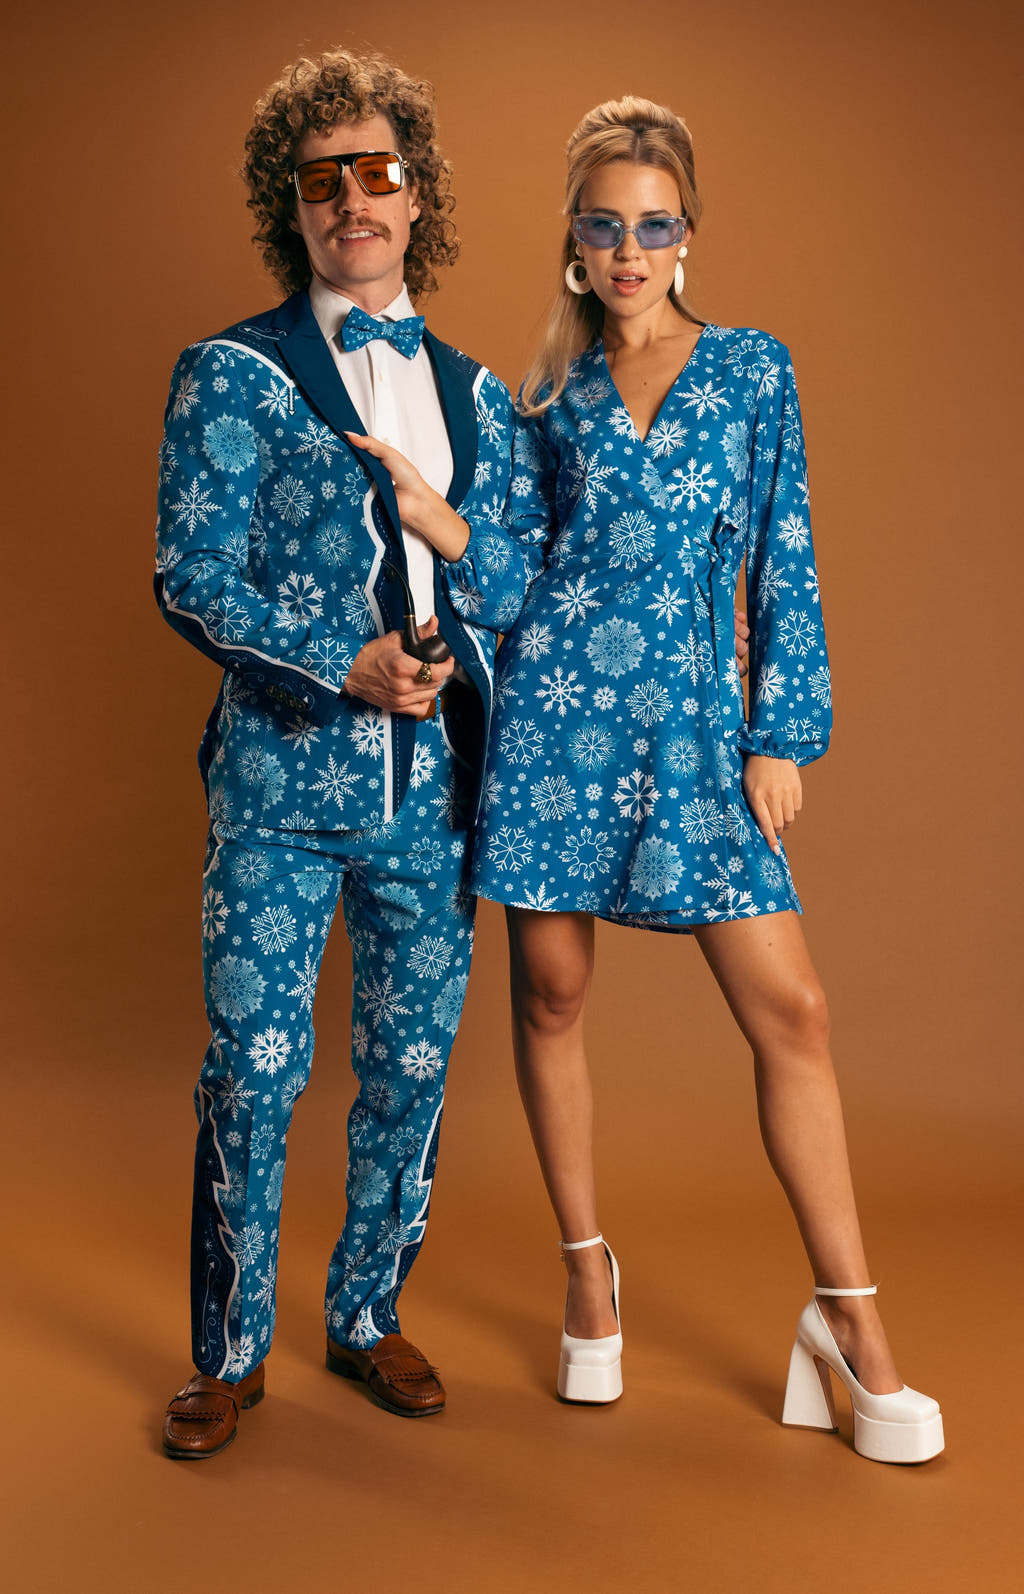 A man and woman in unique holiday attire, showcasing individuality with The Ice Never Melts | Blue Snowflake Christmas Suit.